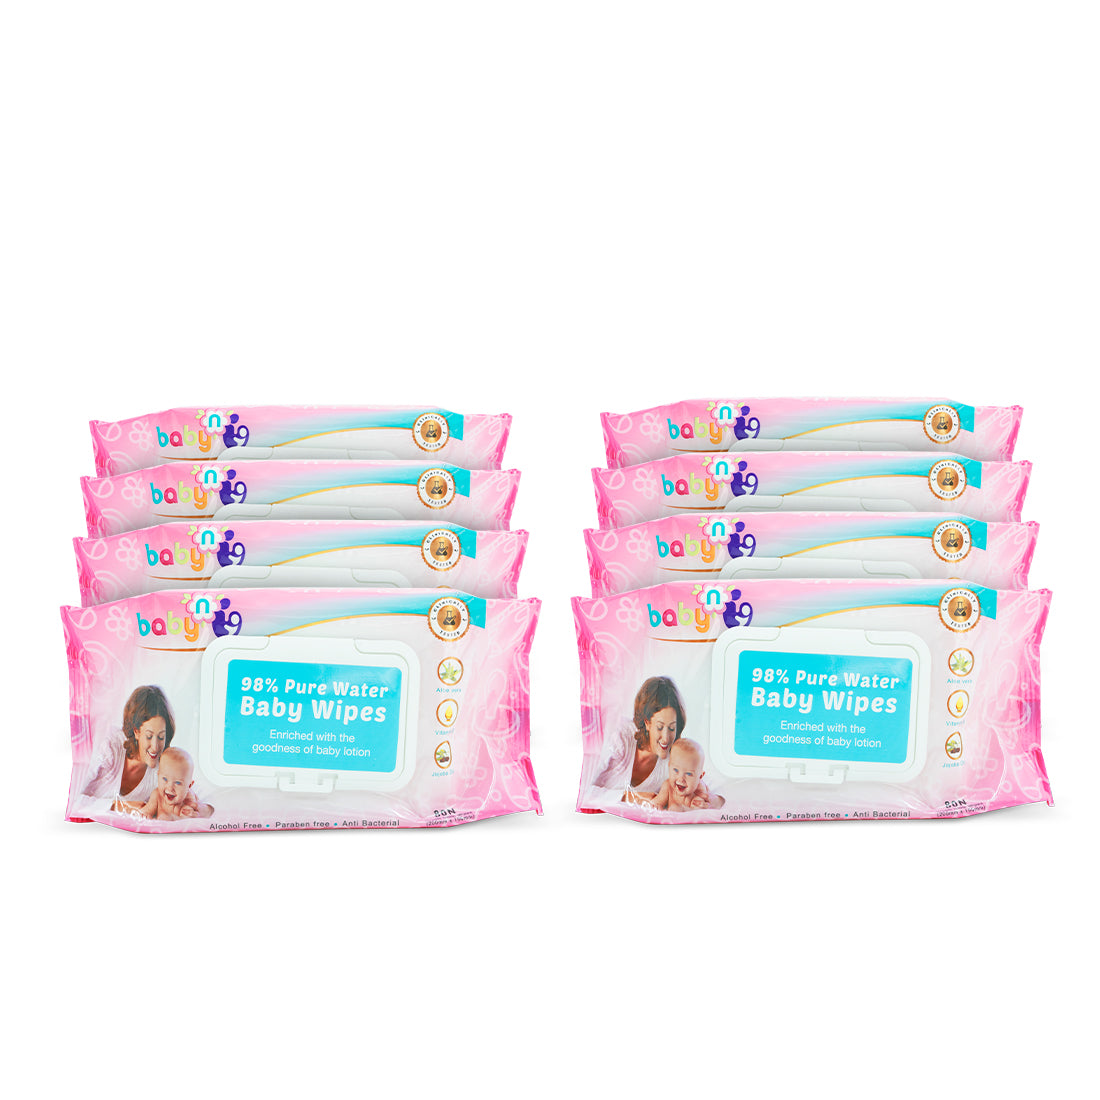 98% Pure Water Baby Wipes - Pack of 8